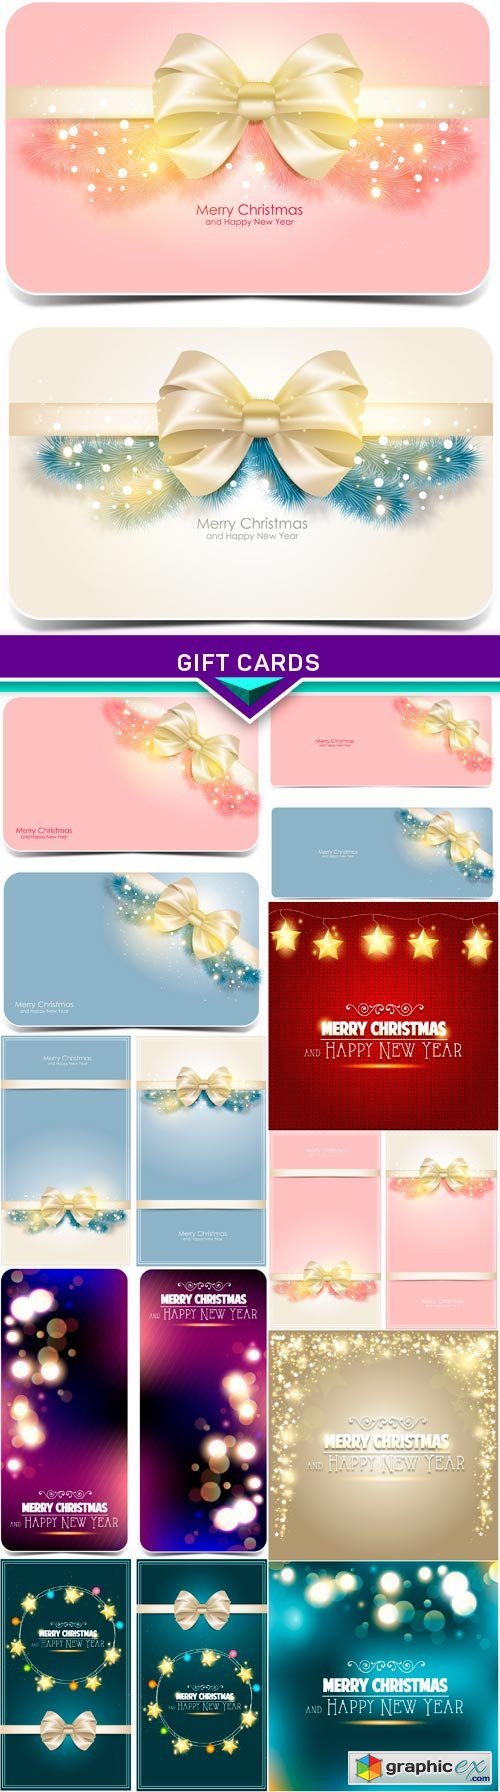 Background Merry Christmas and gift cards 10X EPS